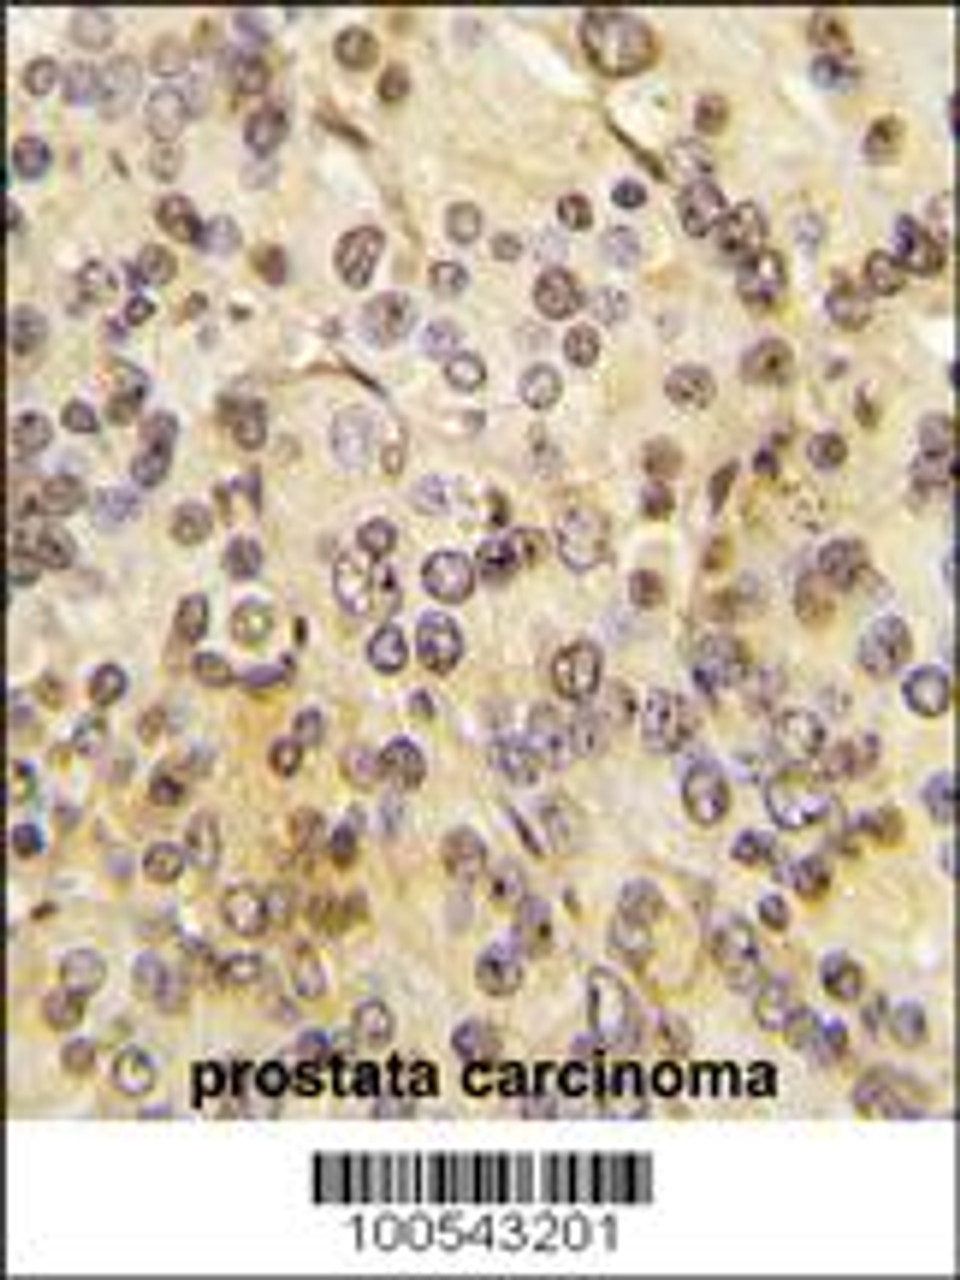 Formalin-fixed and paraffin-embedded human prostata carcinoma tissue reacted with MEN1 Antibody (T594) , which was peroxidase-conjugated to the secondary antibody, followed by DAB staining.